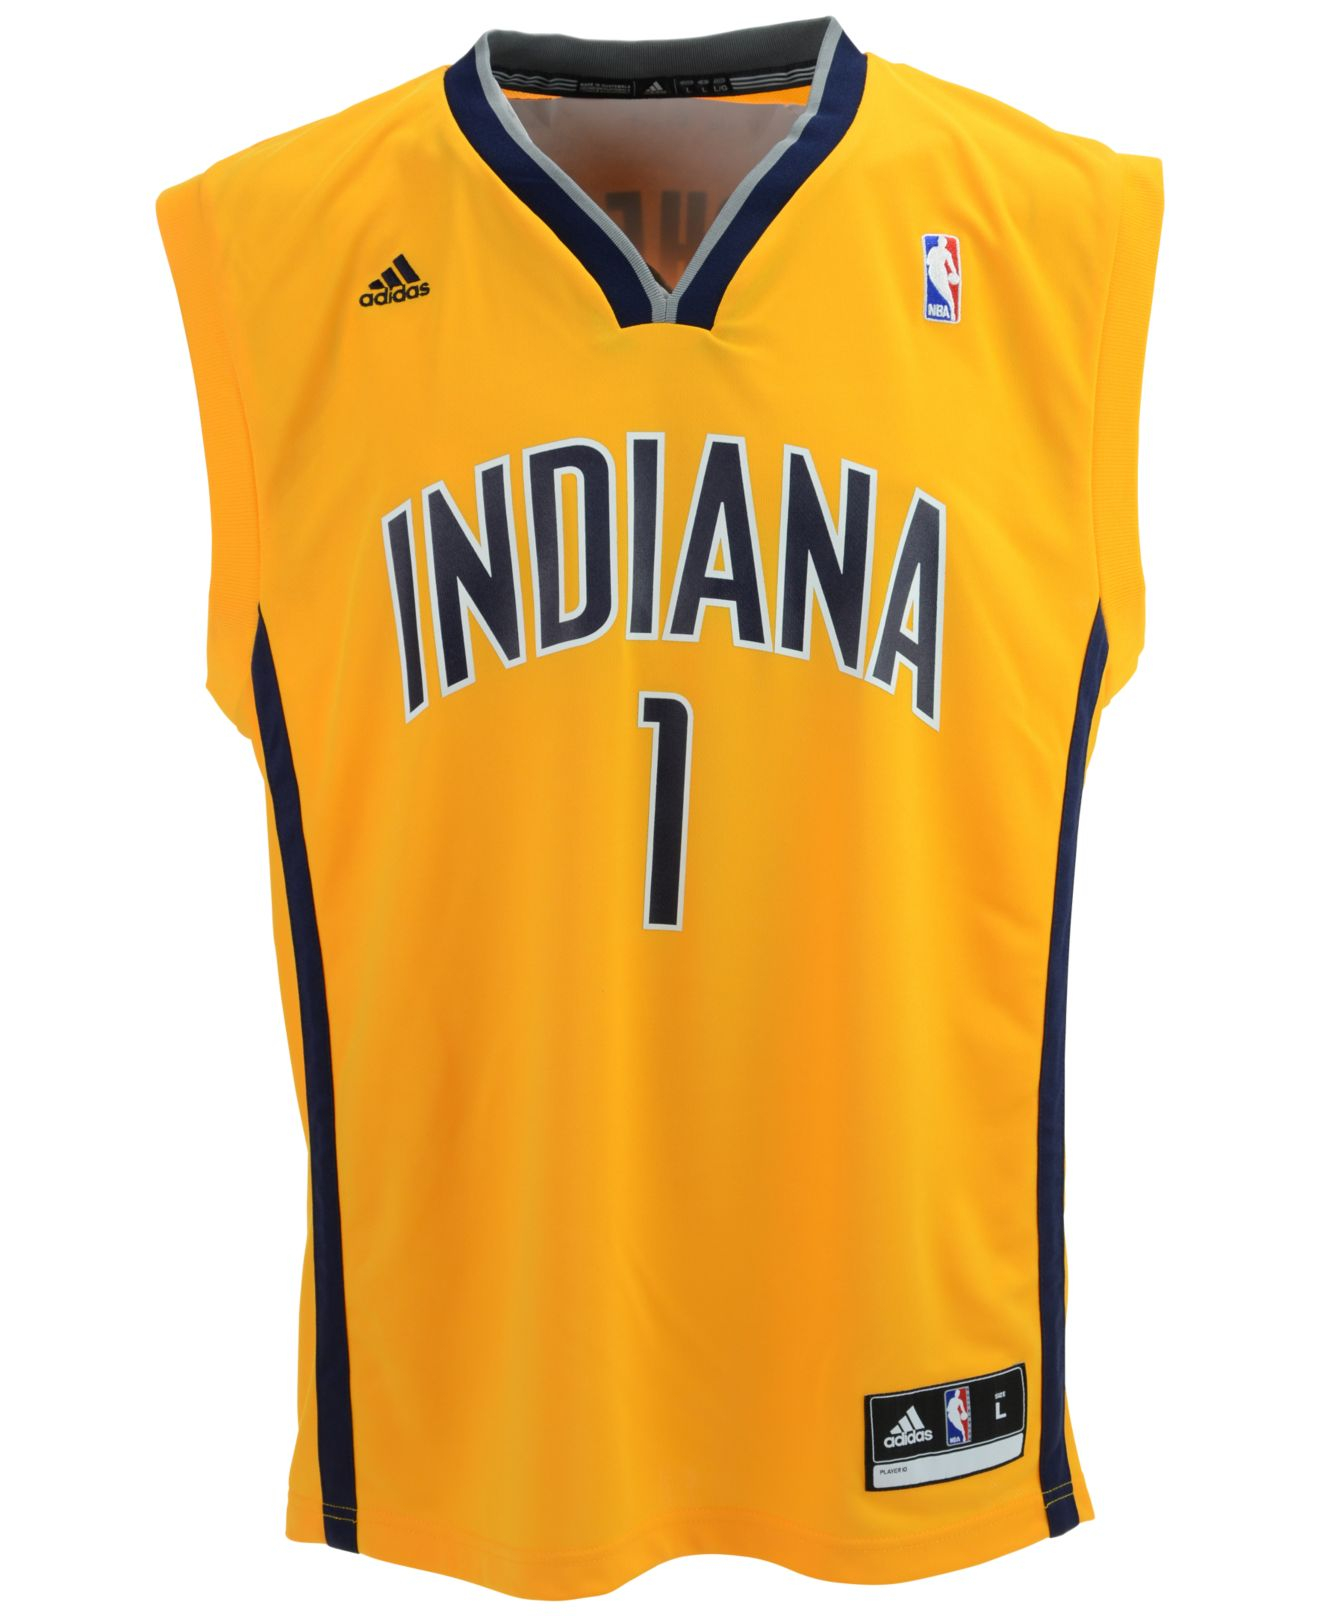 Lyst - Adidas Lance Stephenson Indiana Pacers Rev 30 Replica Jersey in Metallic for Men